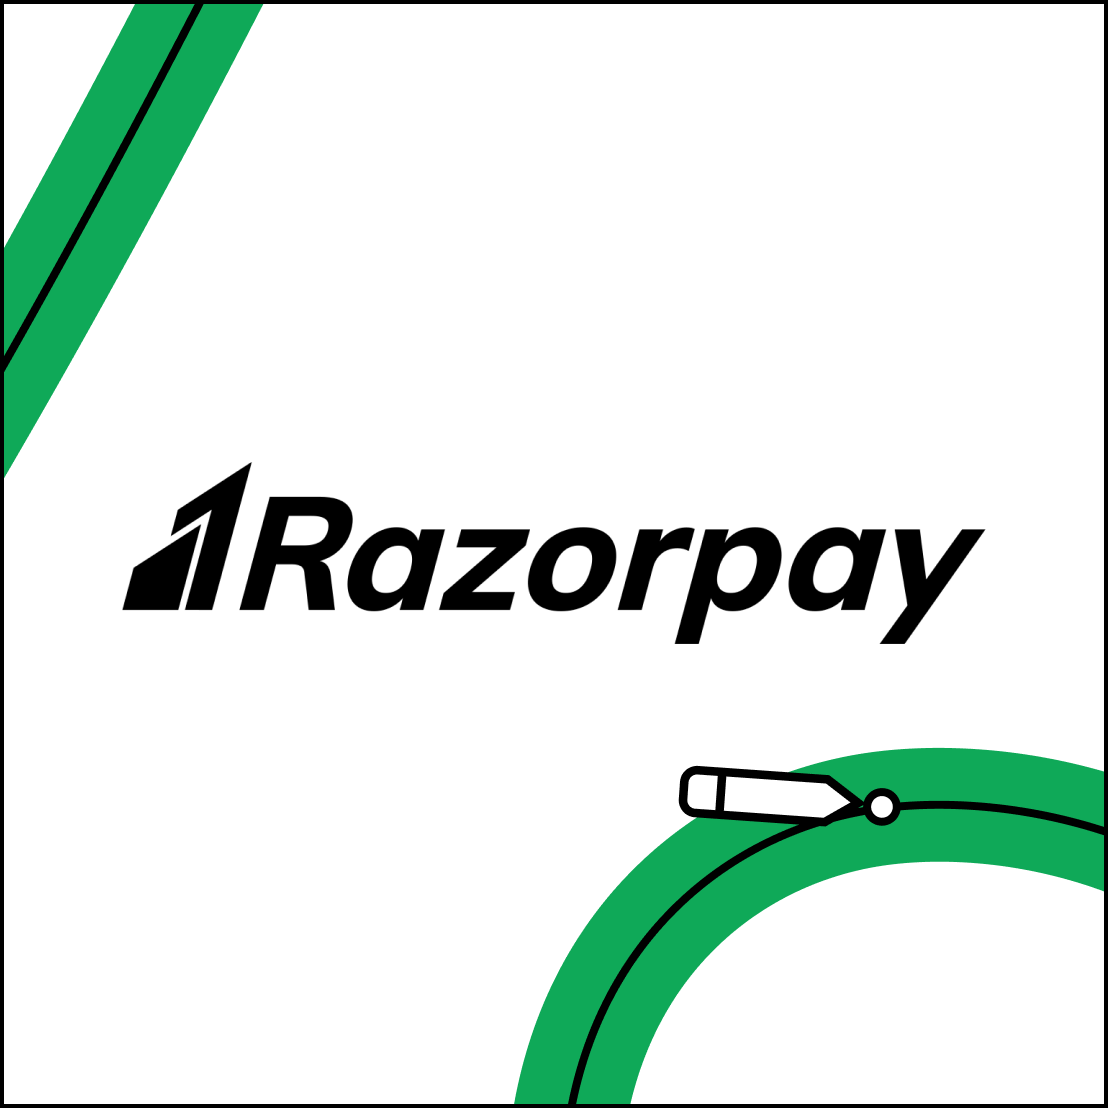 Razorpay Further Strengthens Its Omnichannel Play, Acquires BillMe, A  Digital Invoicing & Customer Engagement Startup for Retail Businesses -  Razorpay Newsroom